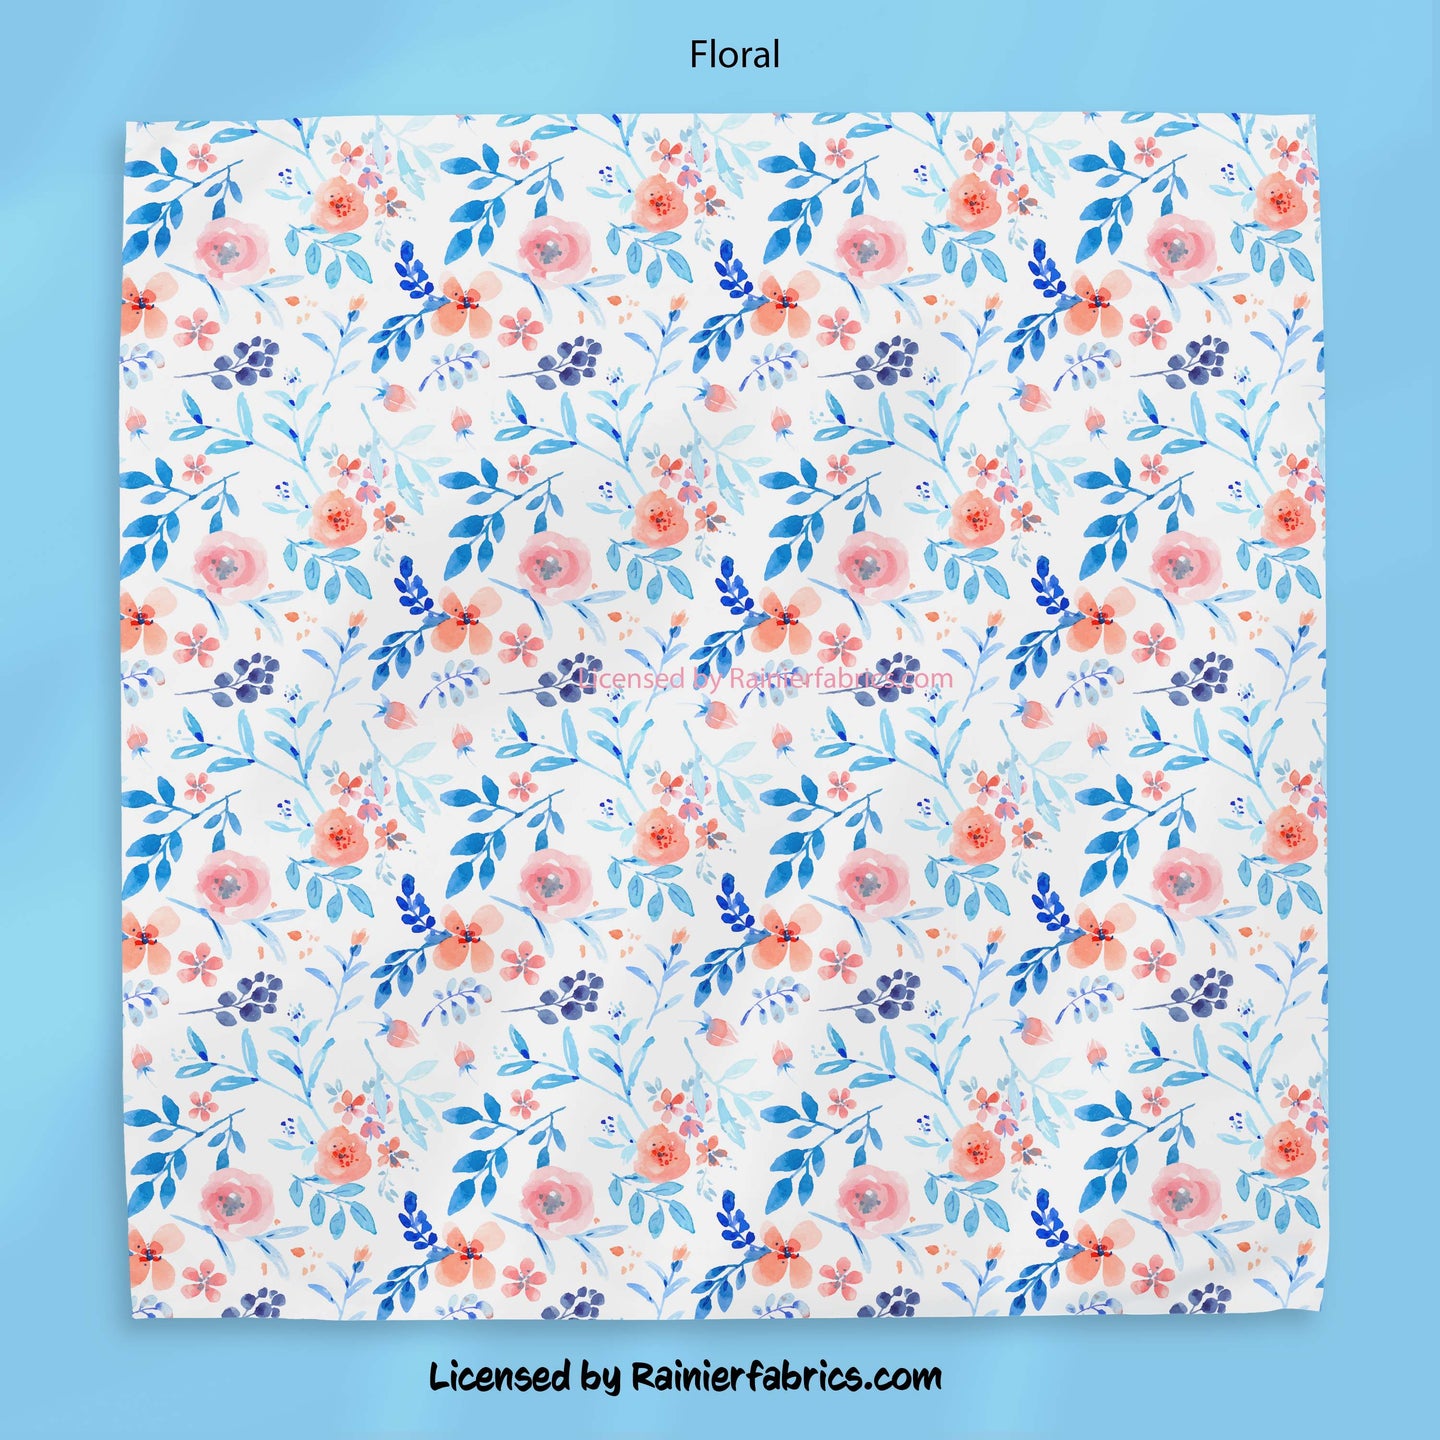 Flowers with blue leaves- 2-5 business days to ship - Order by 1/2 yard